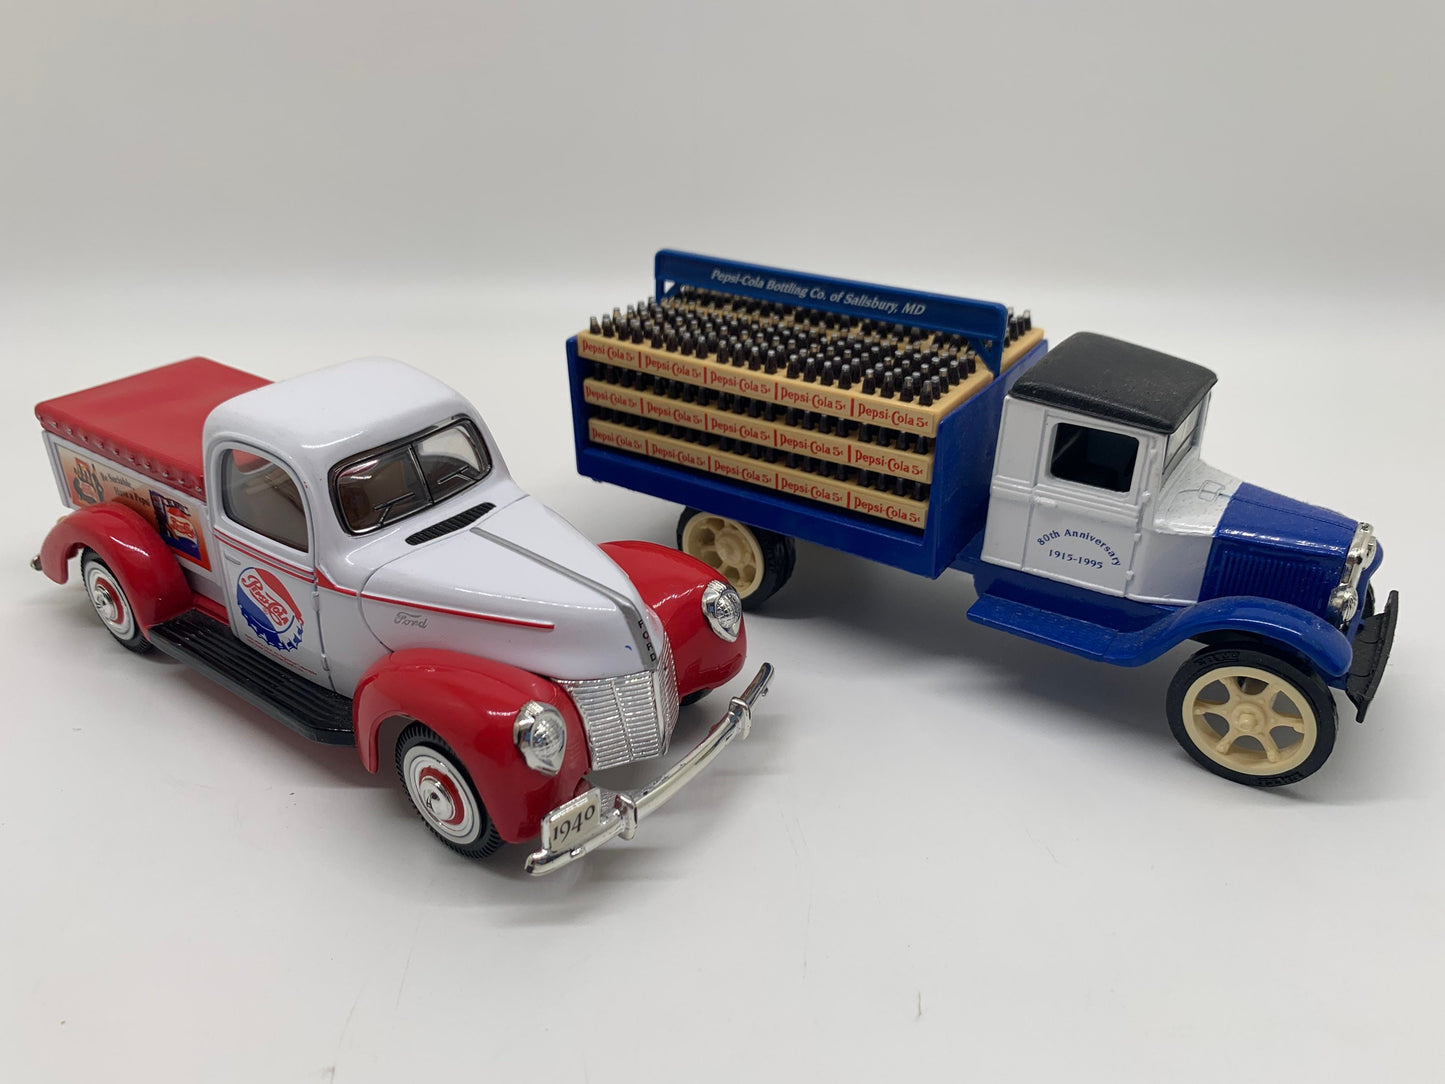 Ertl 1931 Hawkeye Truck Golden Wheel Ford-40 Delivery Truck Pepsi Cola Perfect Birthday Gift Collectible Scale Model Toy Car Pepsi Coin Bank